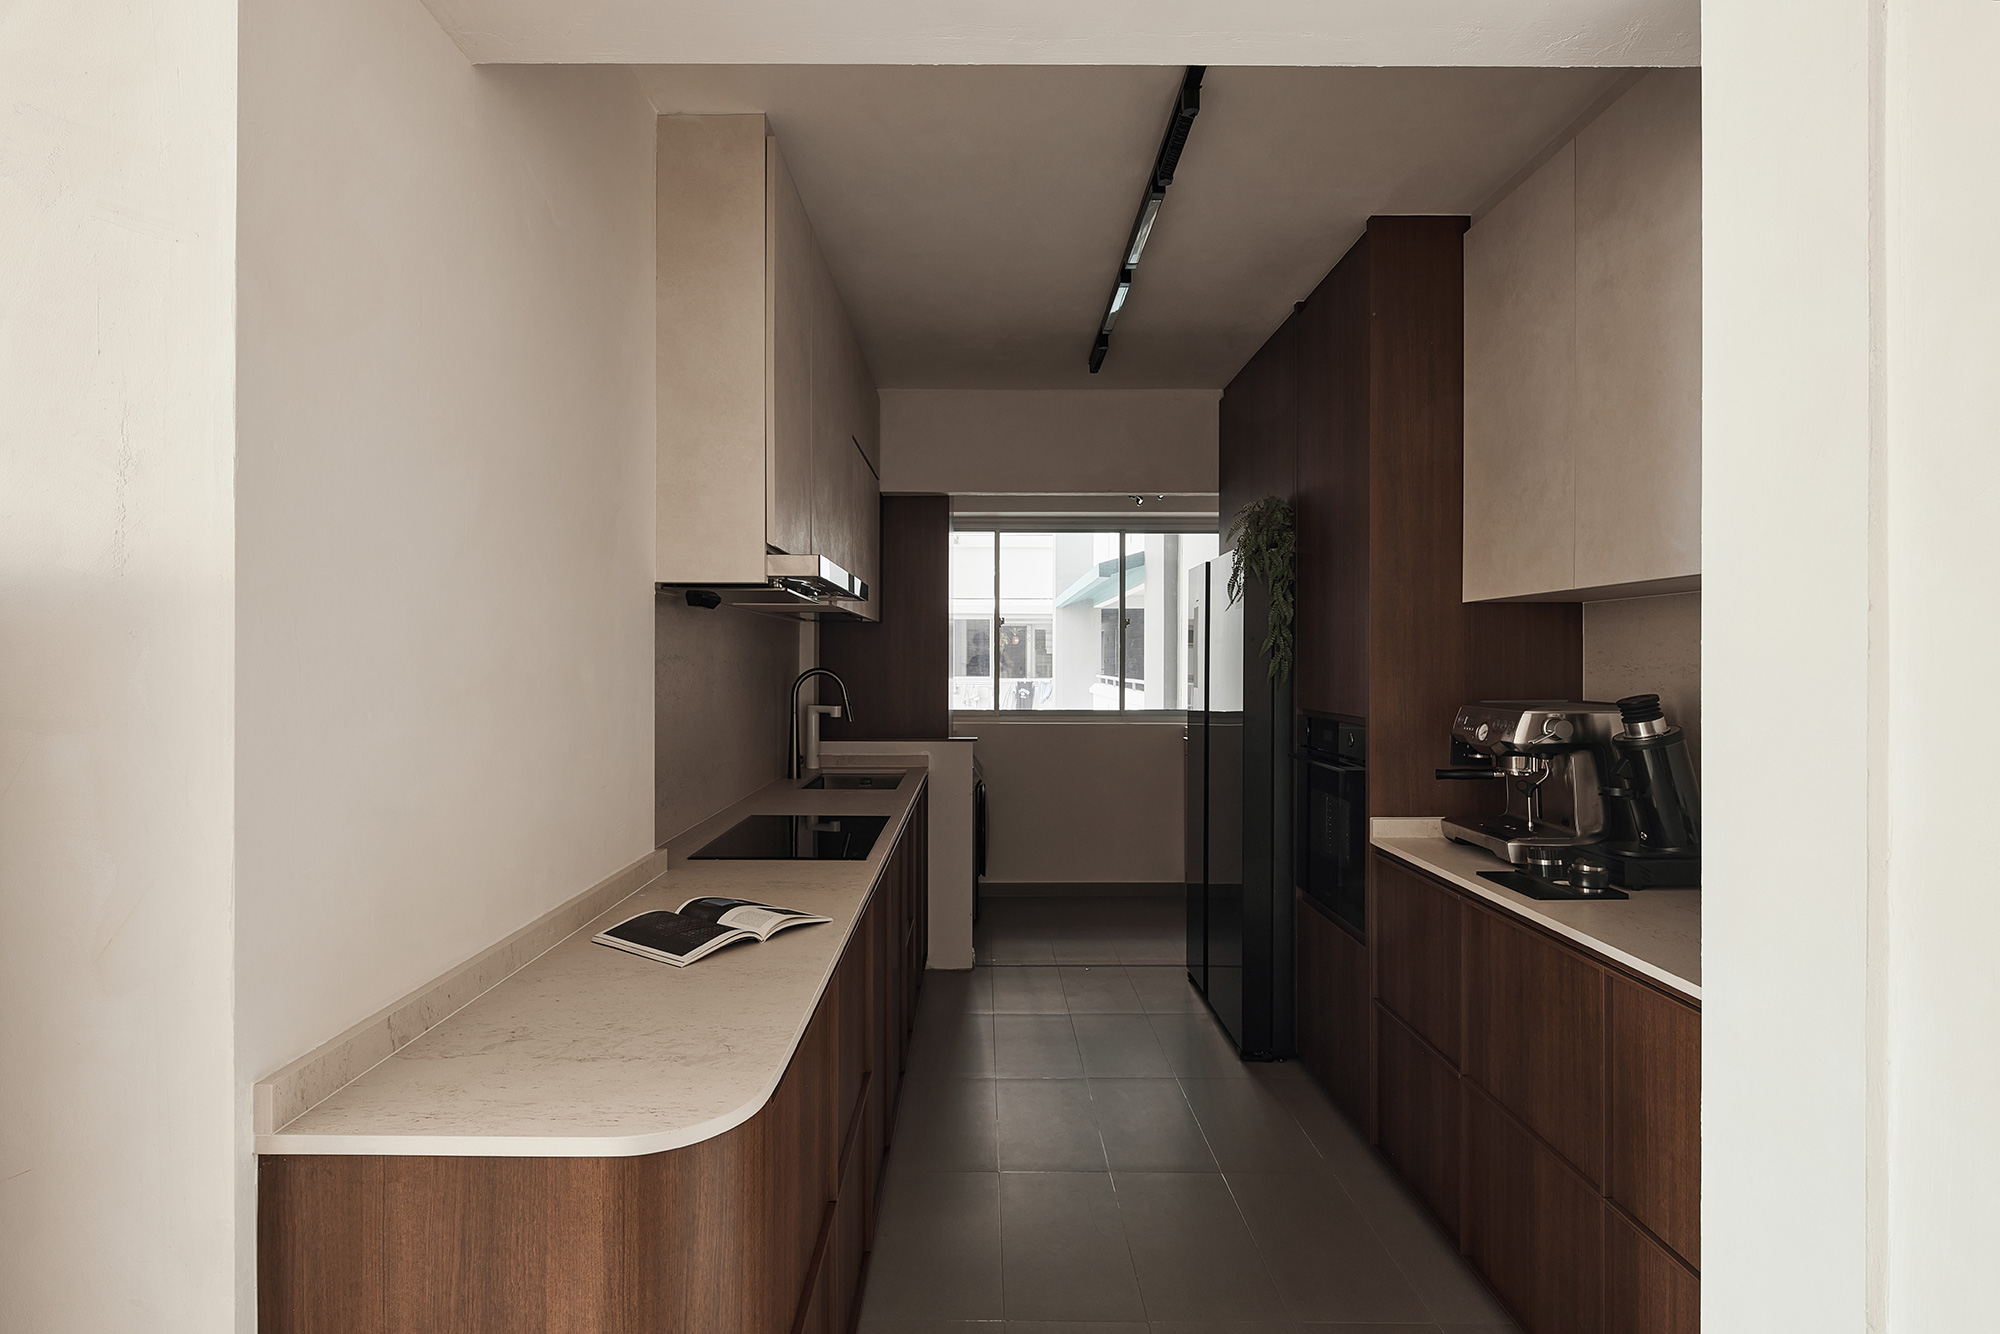 Image of 629A Tampines north dr 2 12 39 15 1 in Dekton Kira is the star of the kitchen in this Madrid flat that redefines the concept of luxury - Cosentino